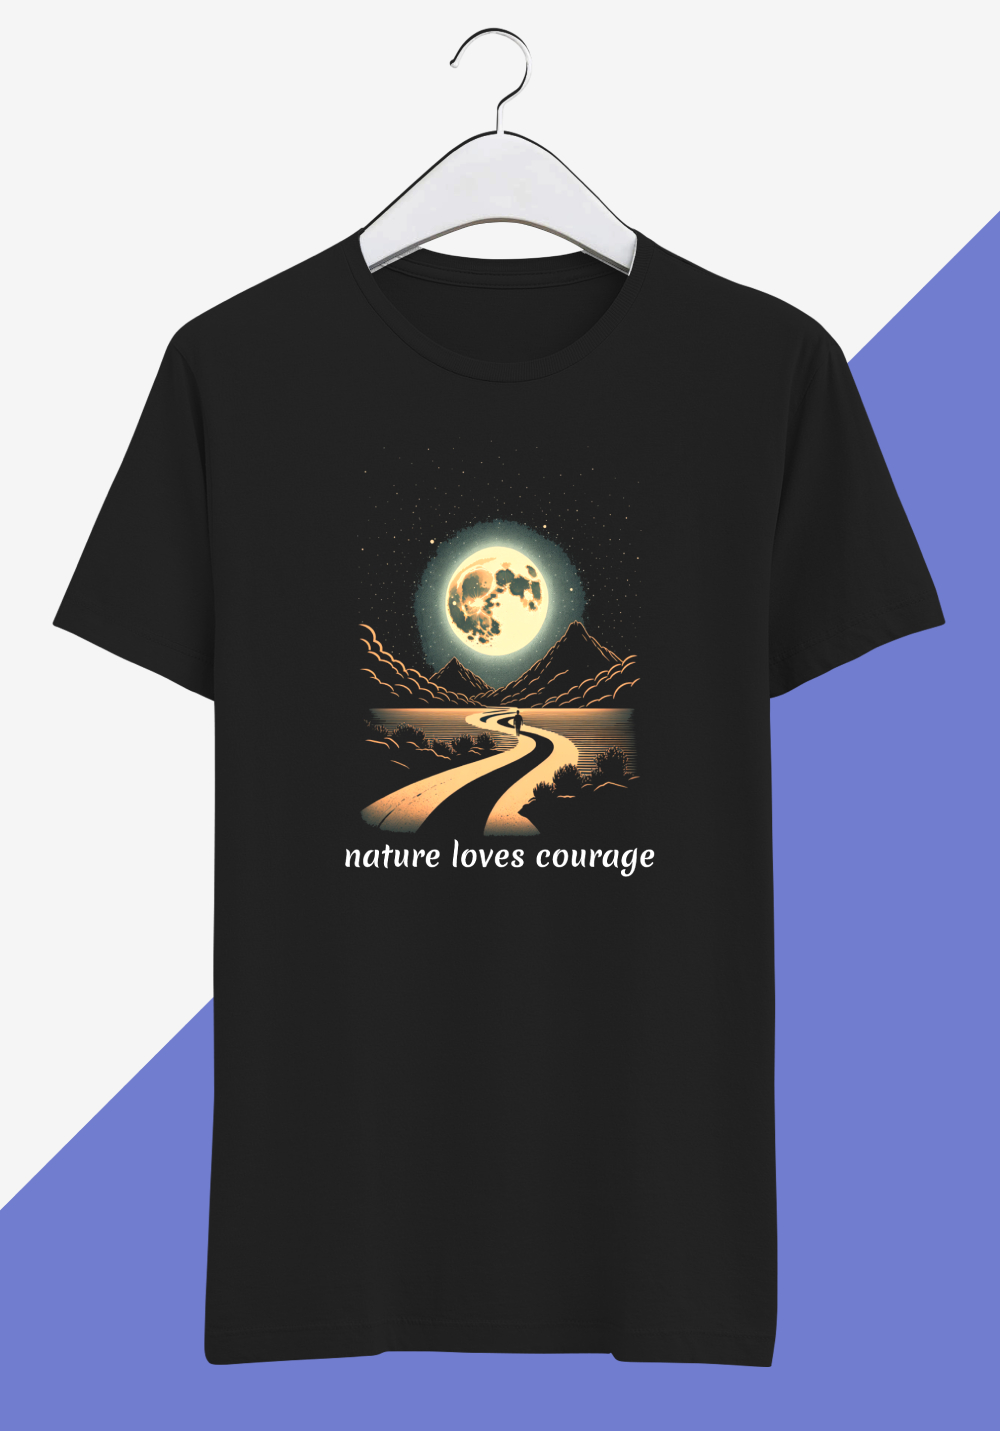 nature-loves-courage-graphic-black-t-shirt